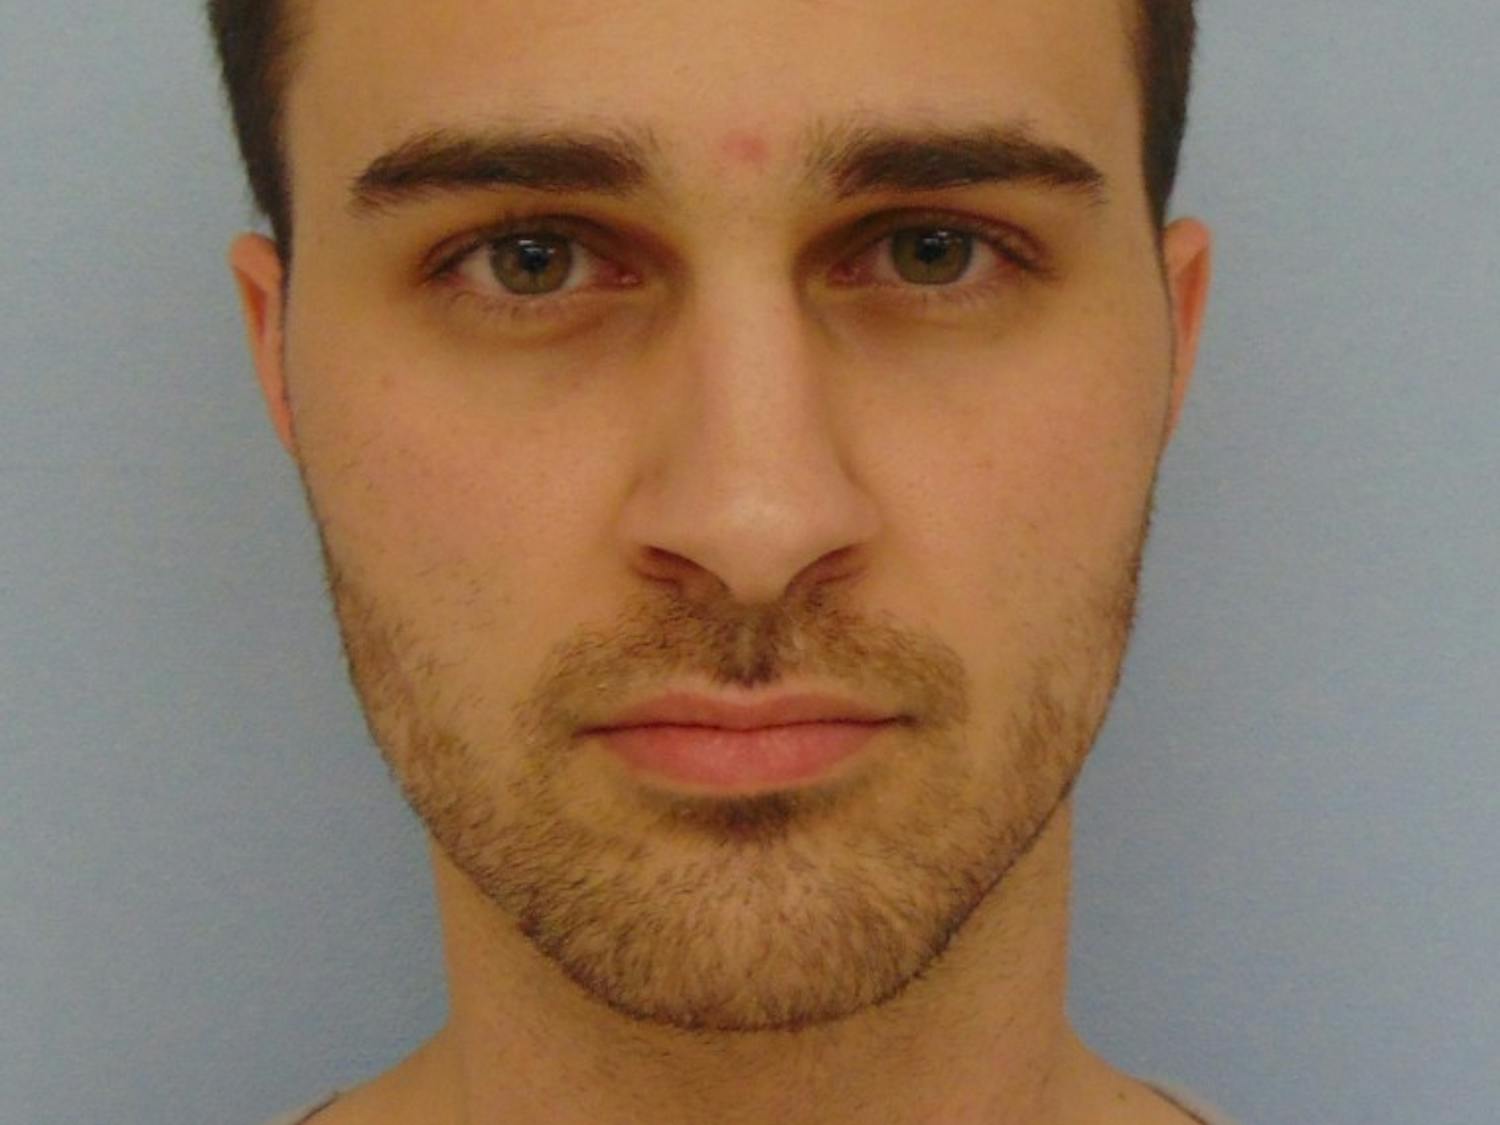 Andrew Benjamin Cantley, 24, was arrested by Auburn police, charged with producing and possessing child pornography.&nbsp;